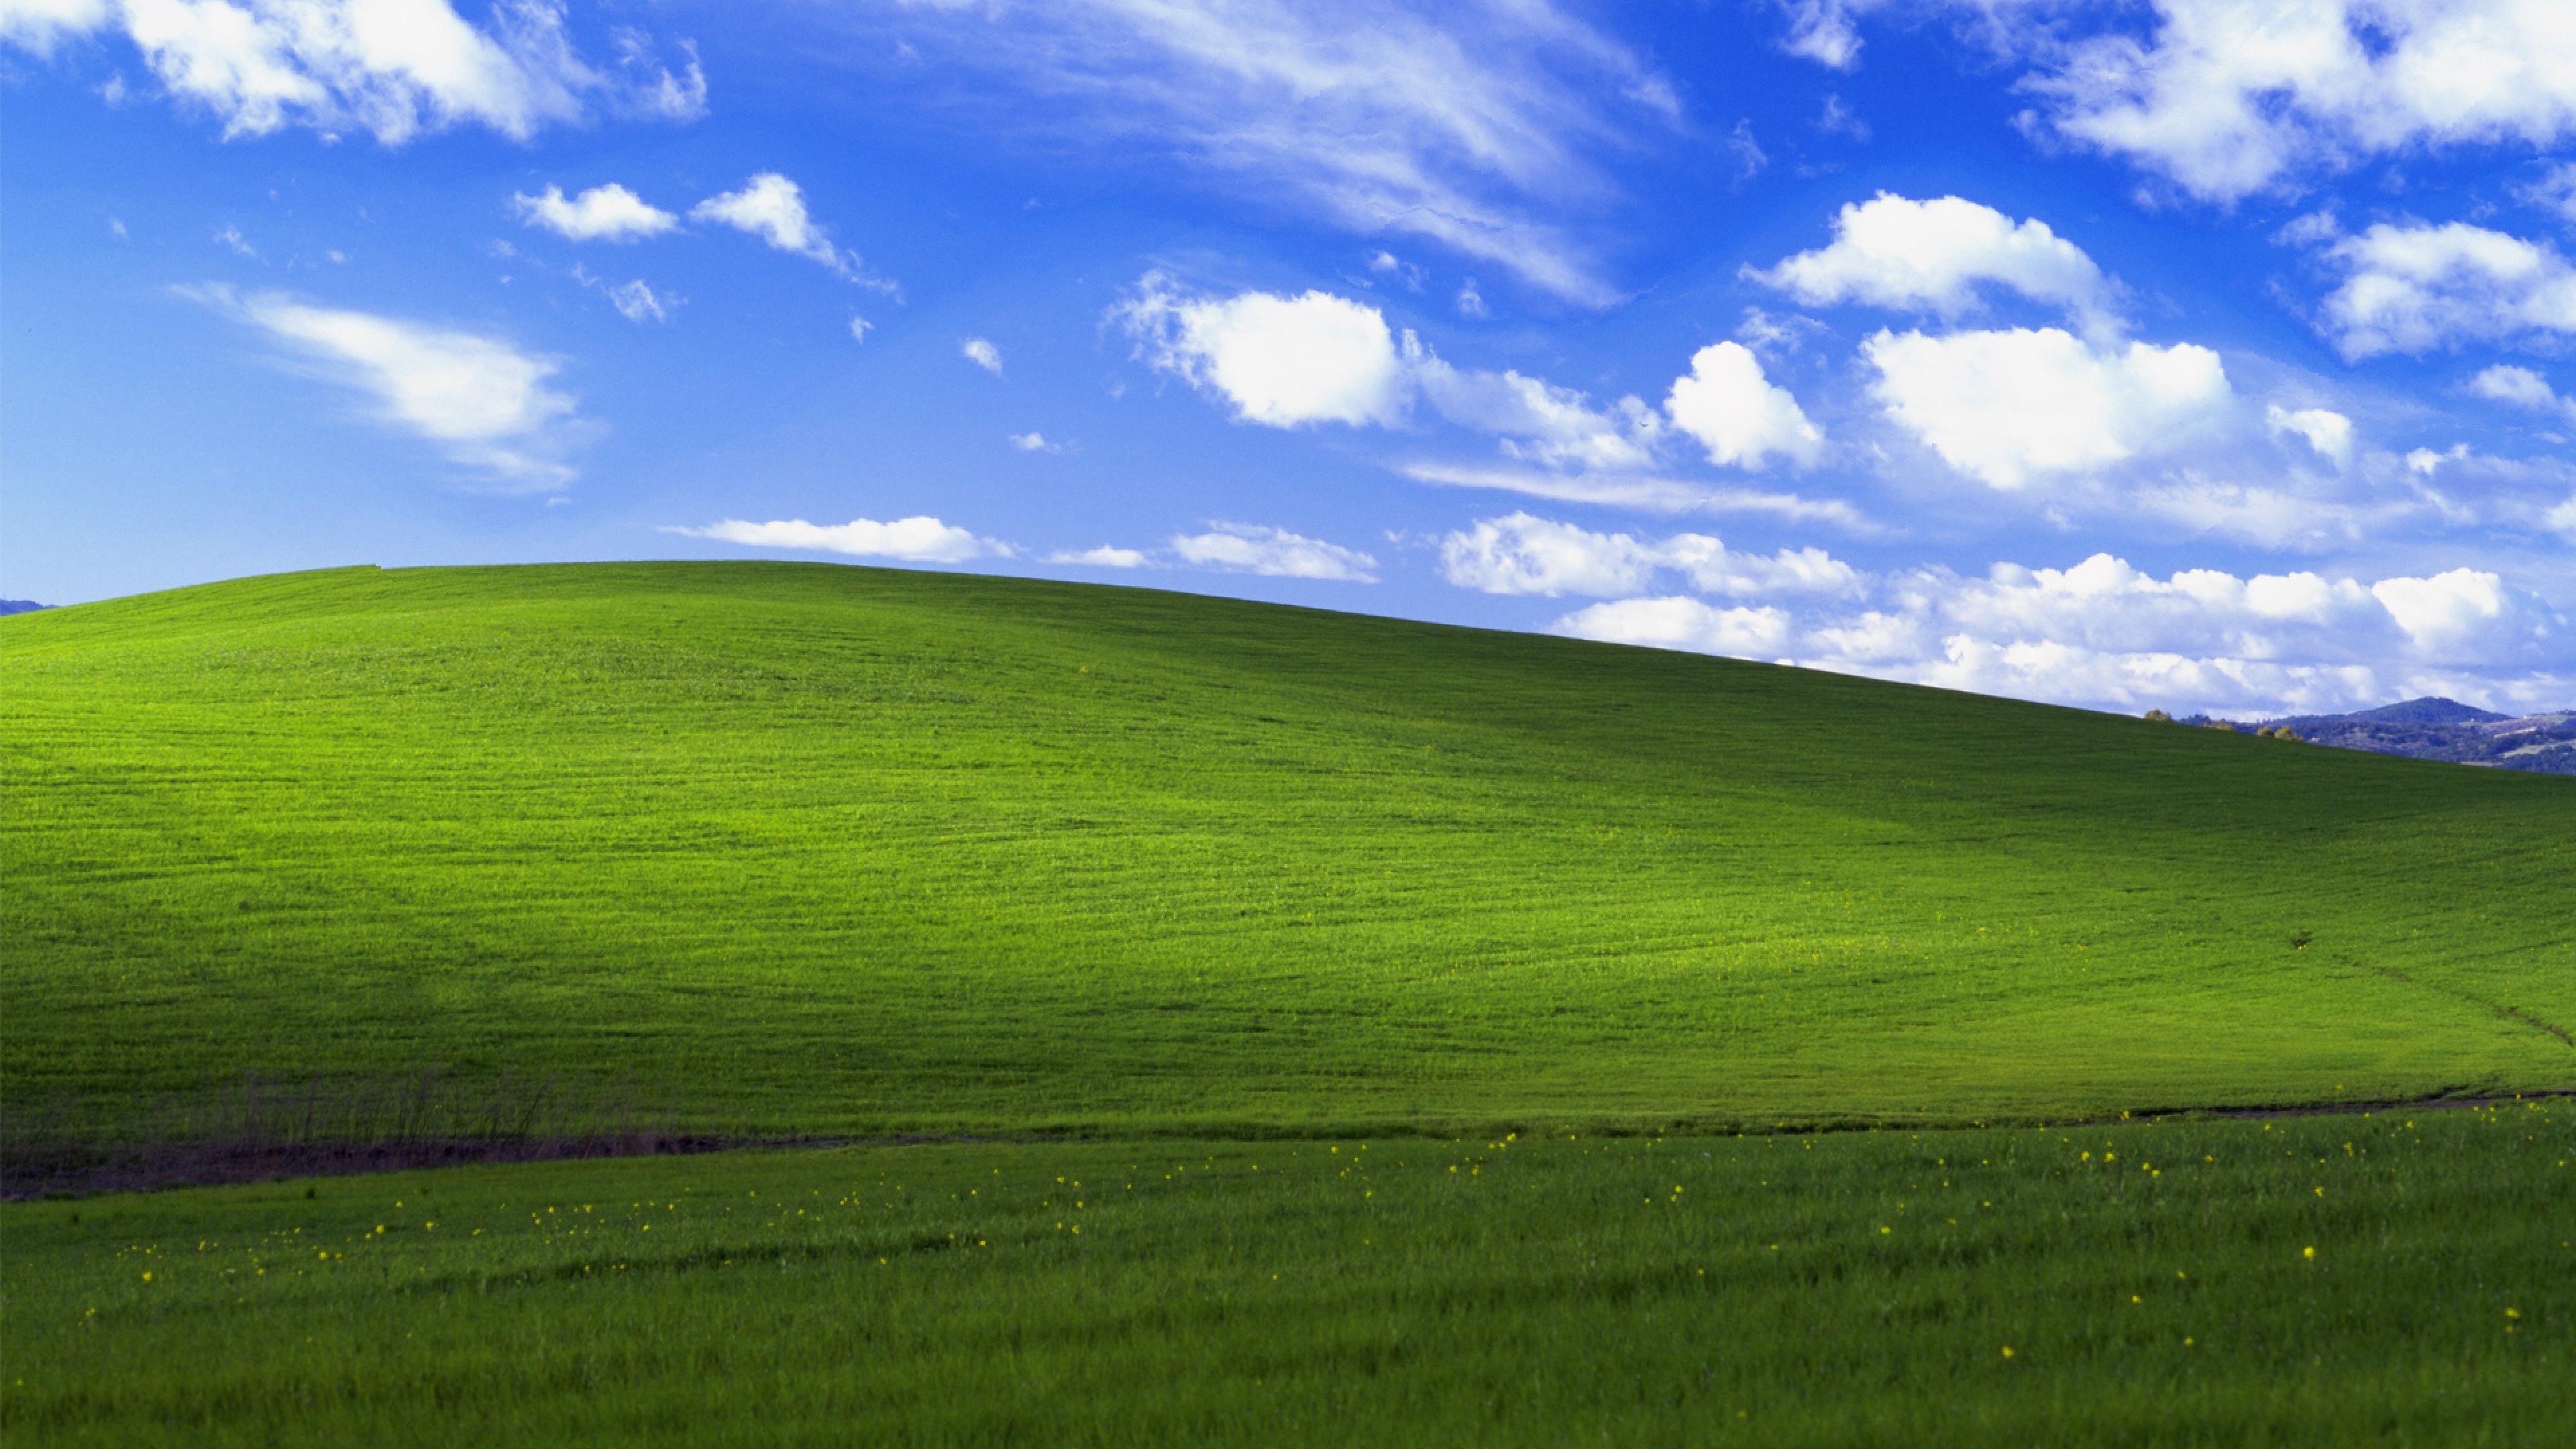 Windows 10 Cool Backgrounds Wallpapers 2894 - HD Wallpapers Site